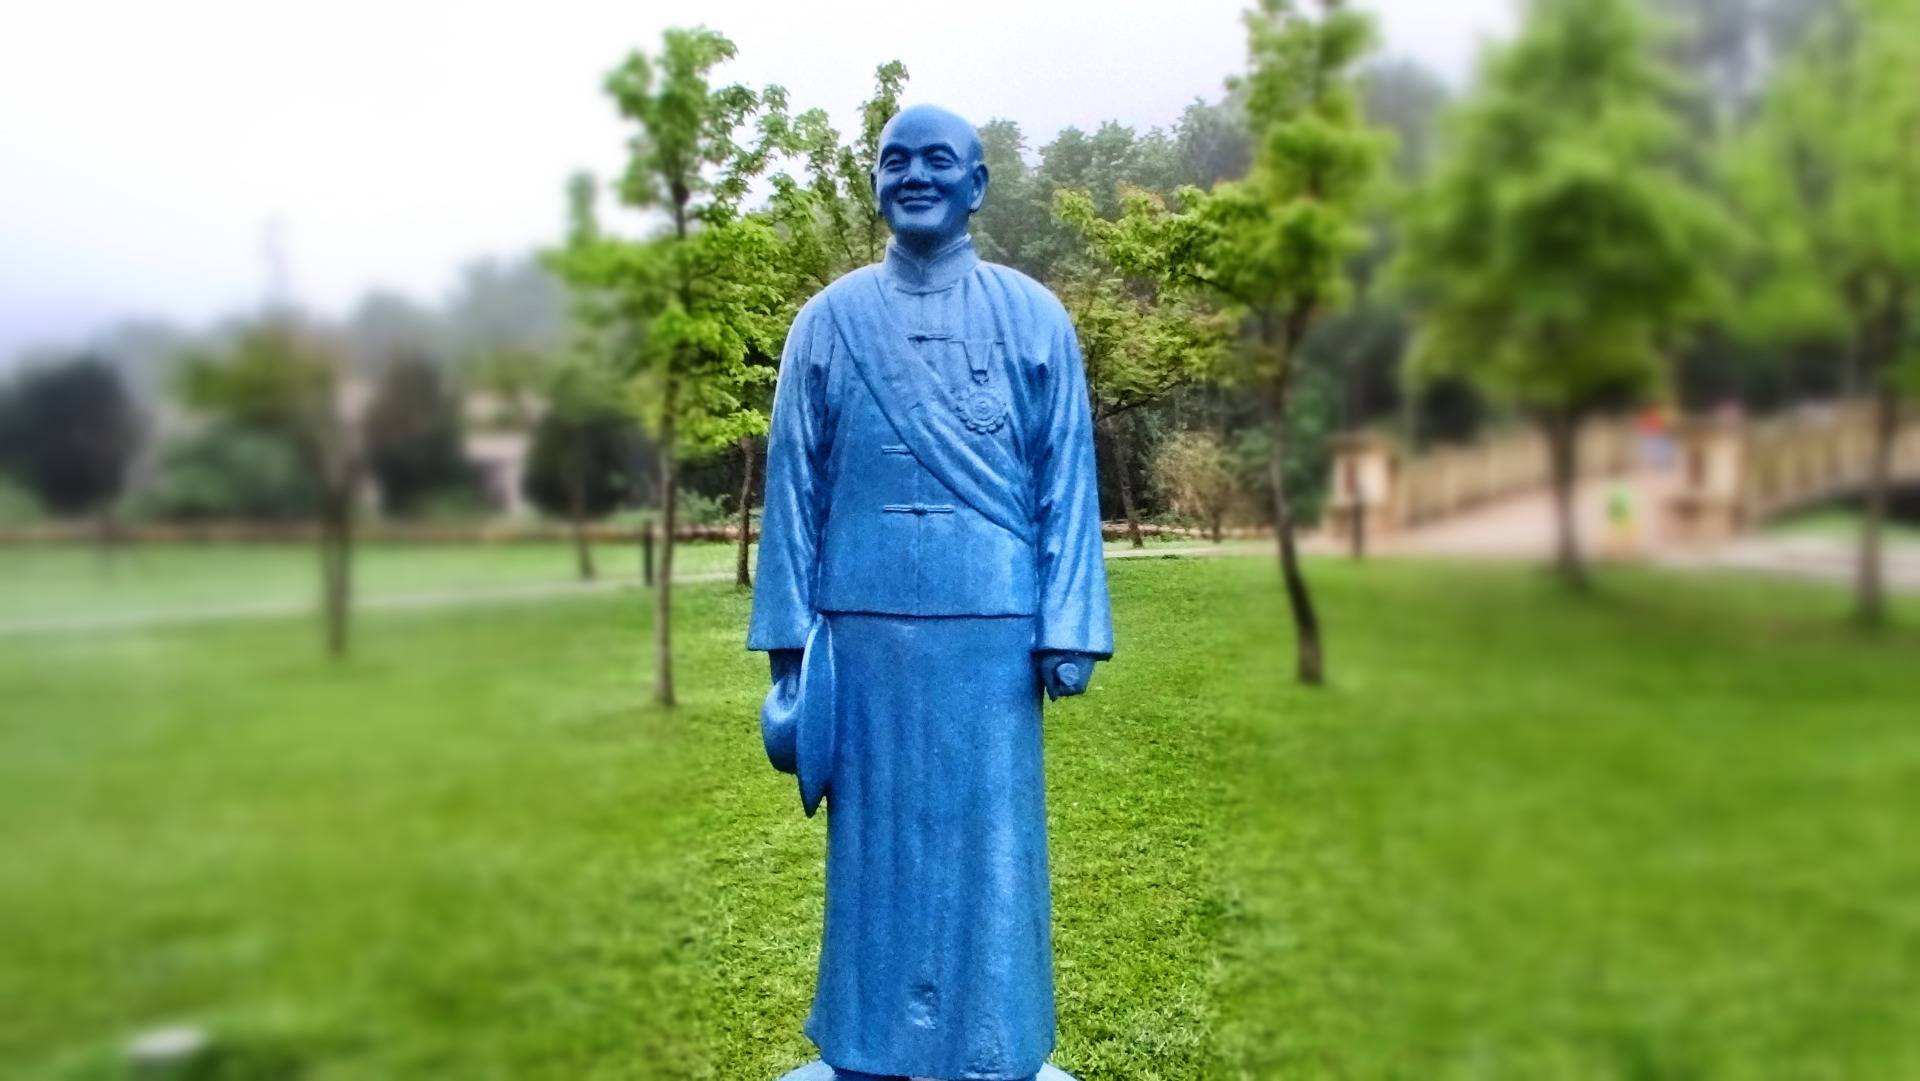 He’s blue in this sculpture